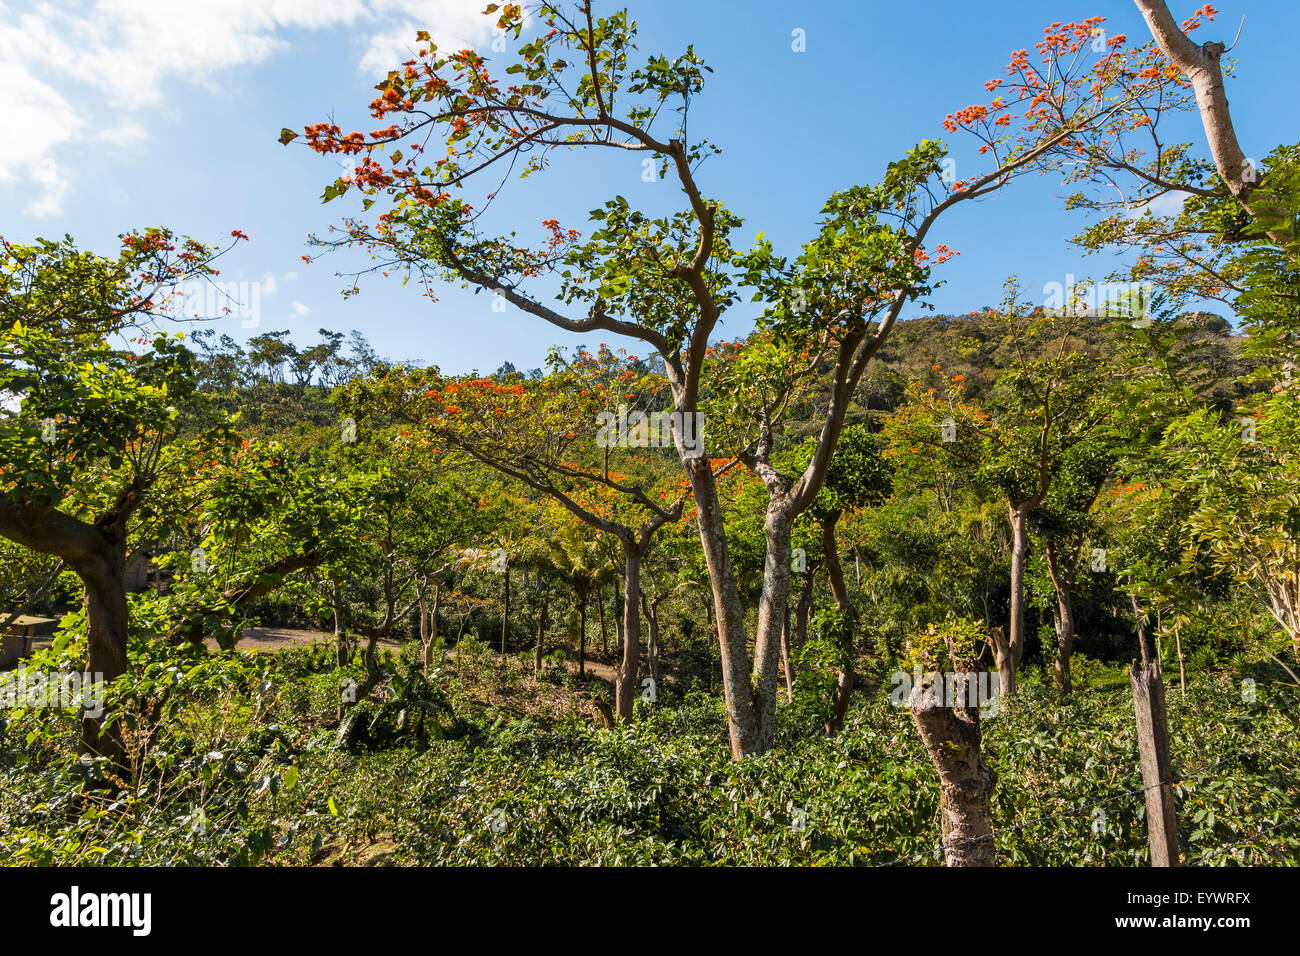 Typical flowering shade tree Arabica coffee plantation in highlands en route to Jinotega, Matagalpa, Nicaragua, Central America Stock Photo